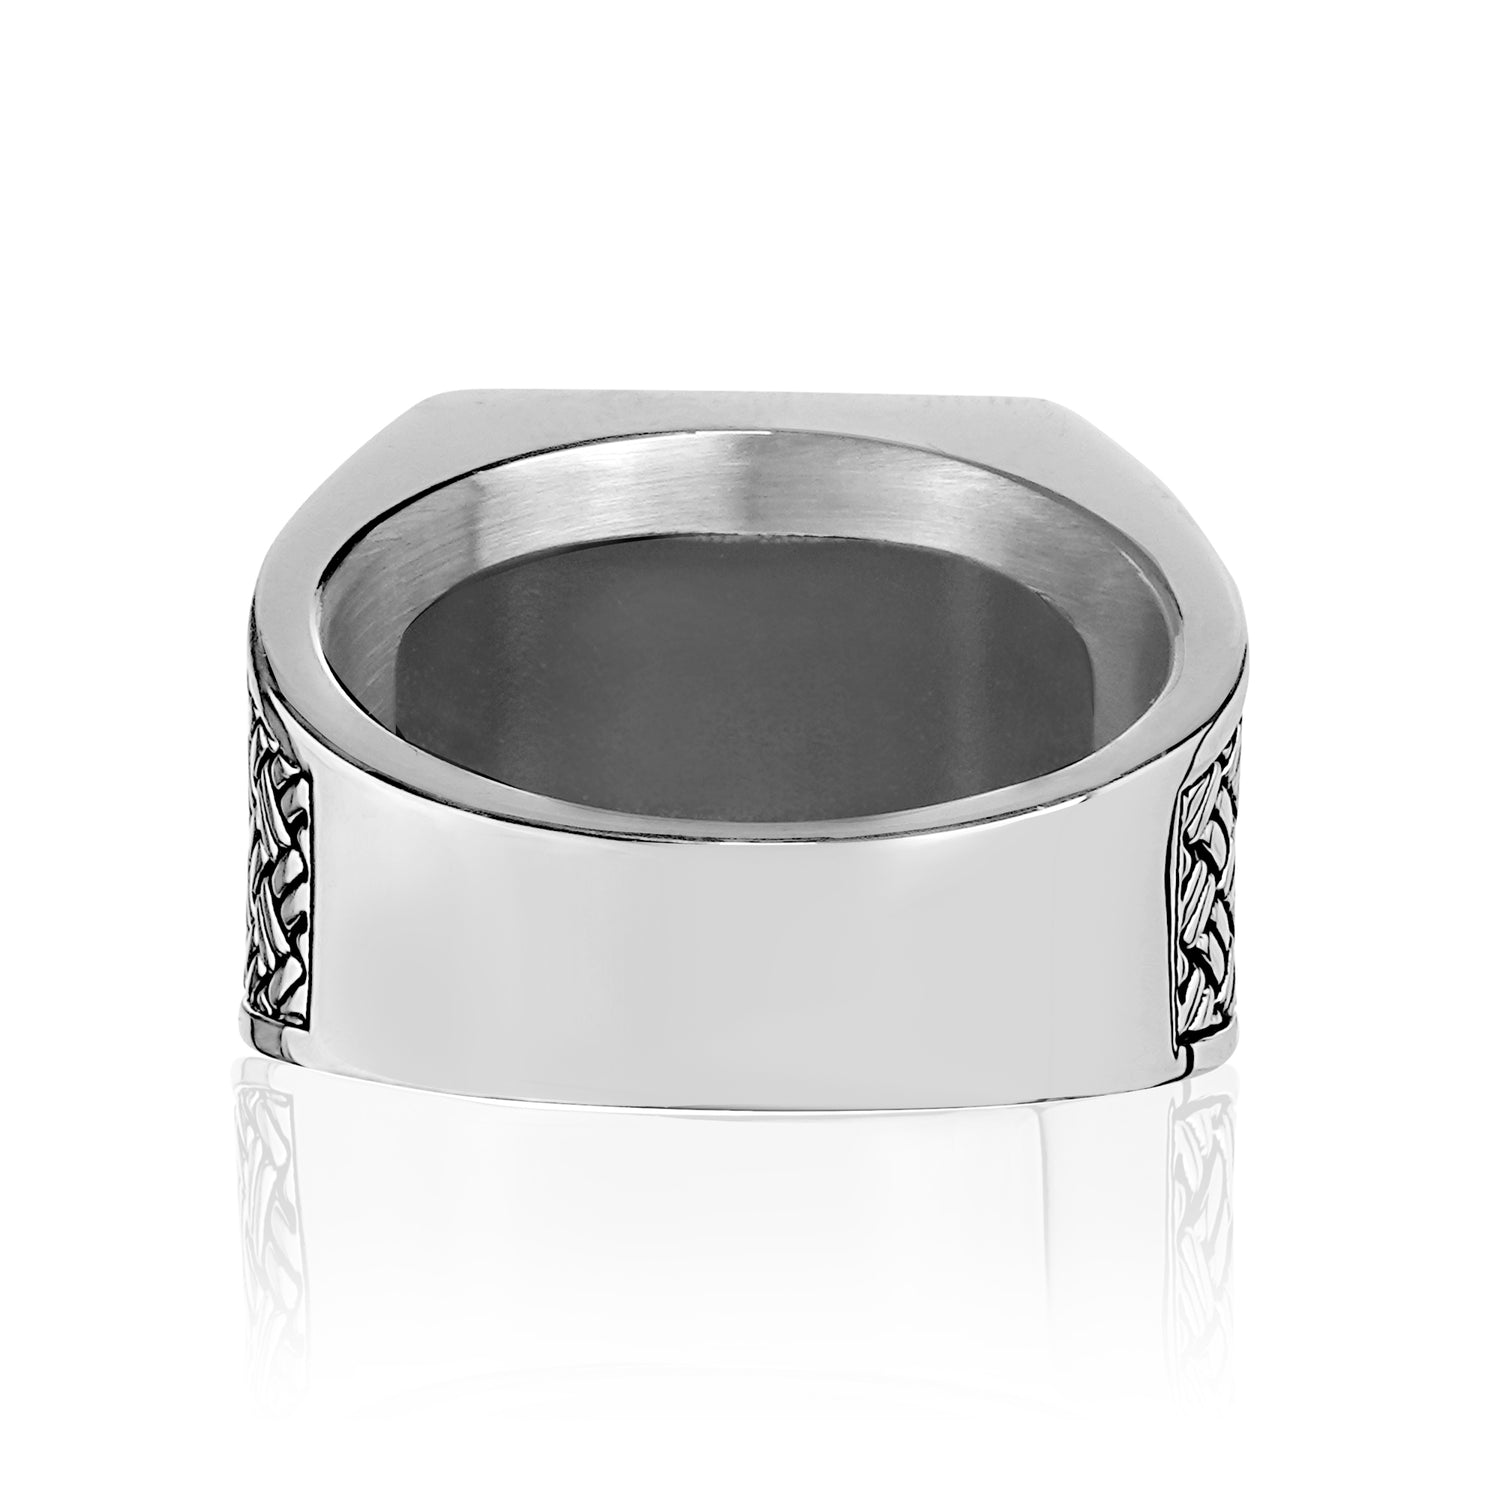 Black onyx stainless steel detailed signet ring – The Steel Shop